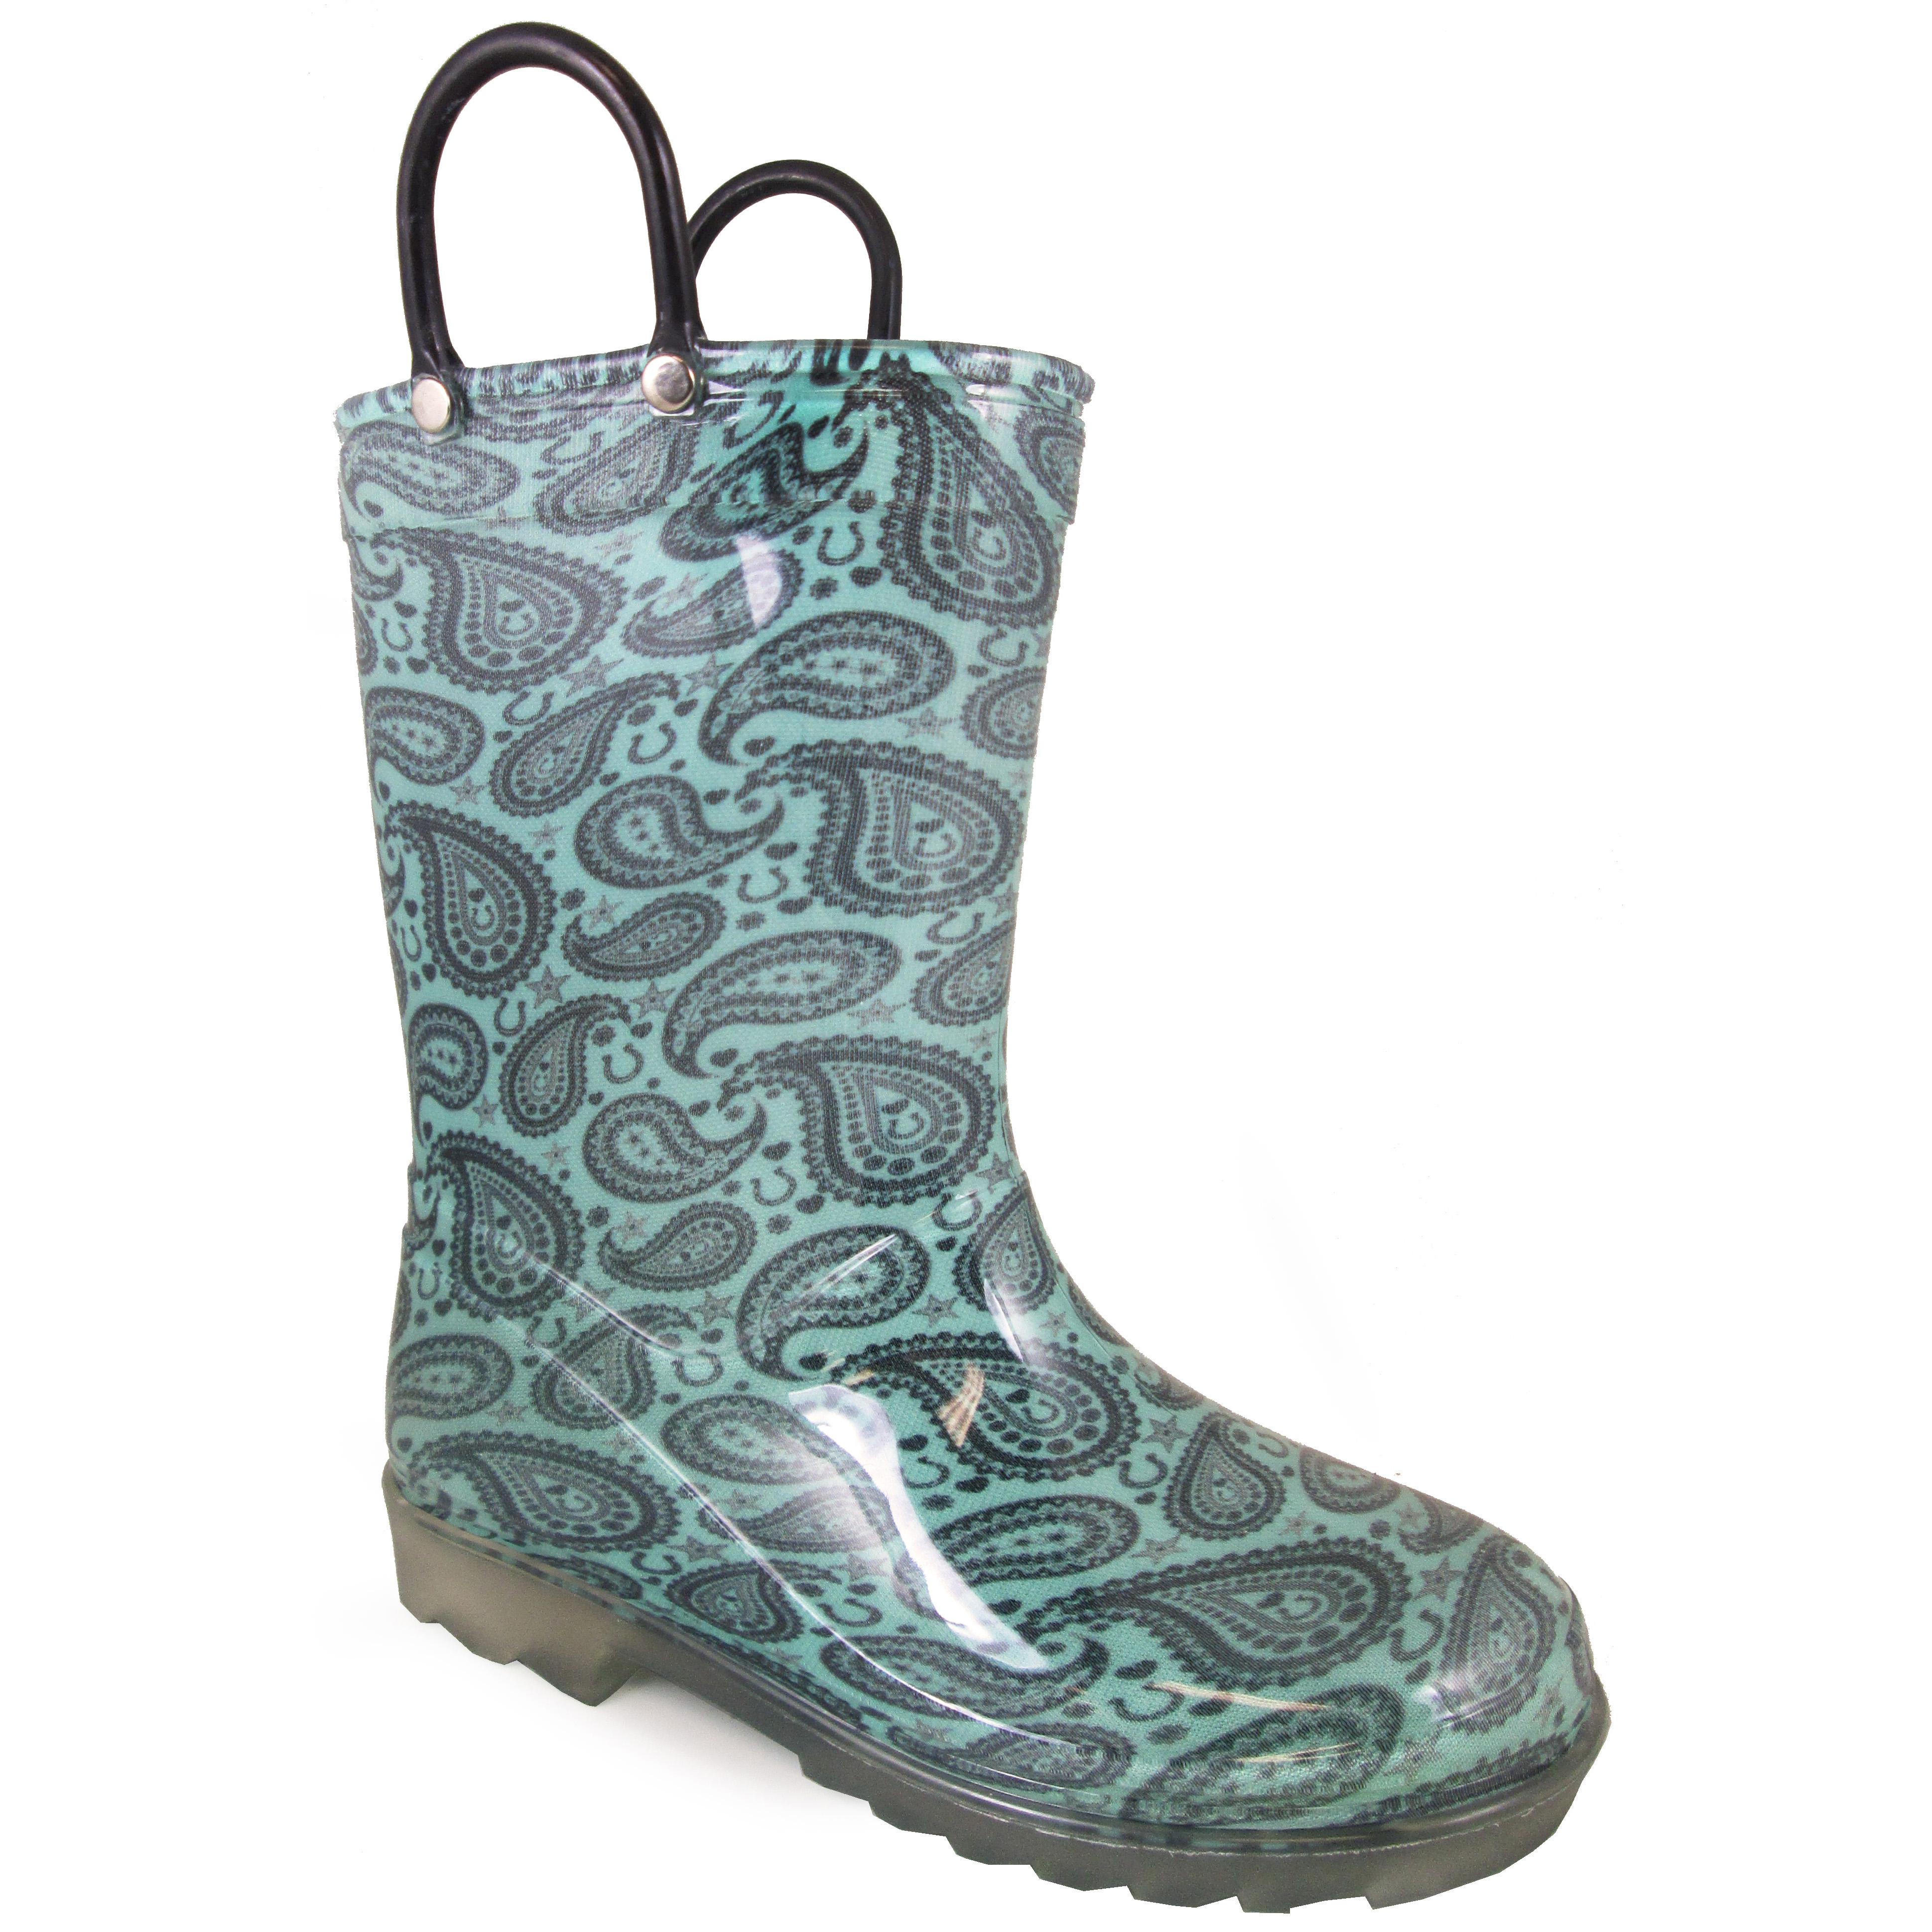 Smoky Mountain Boots Kid's Lightning Turquoise PVC Boot - Sole Lights Up